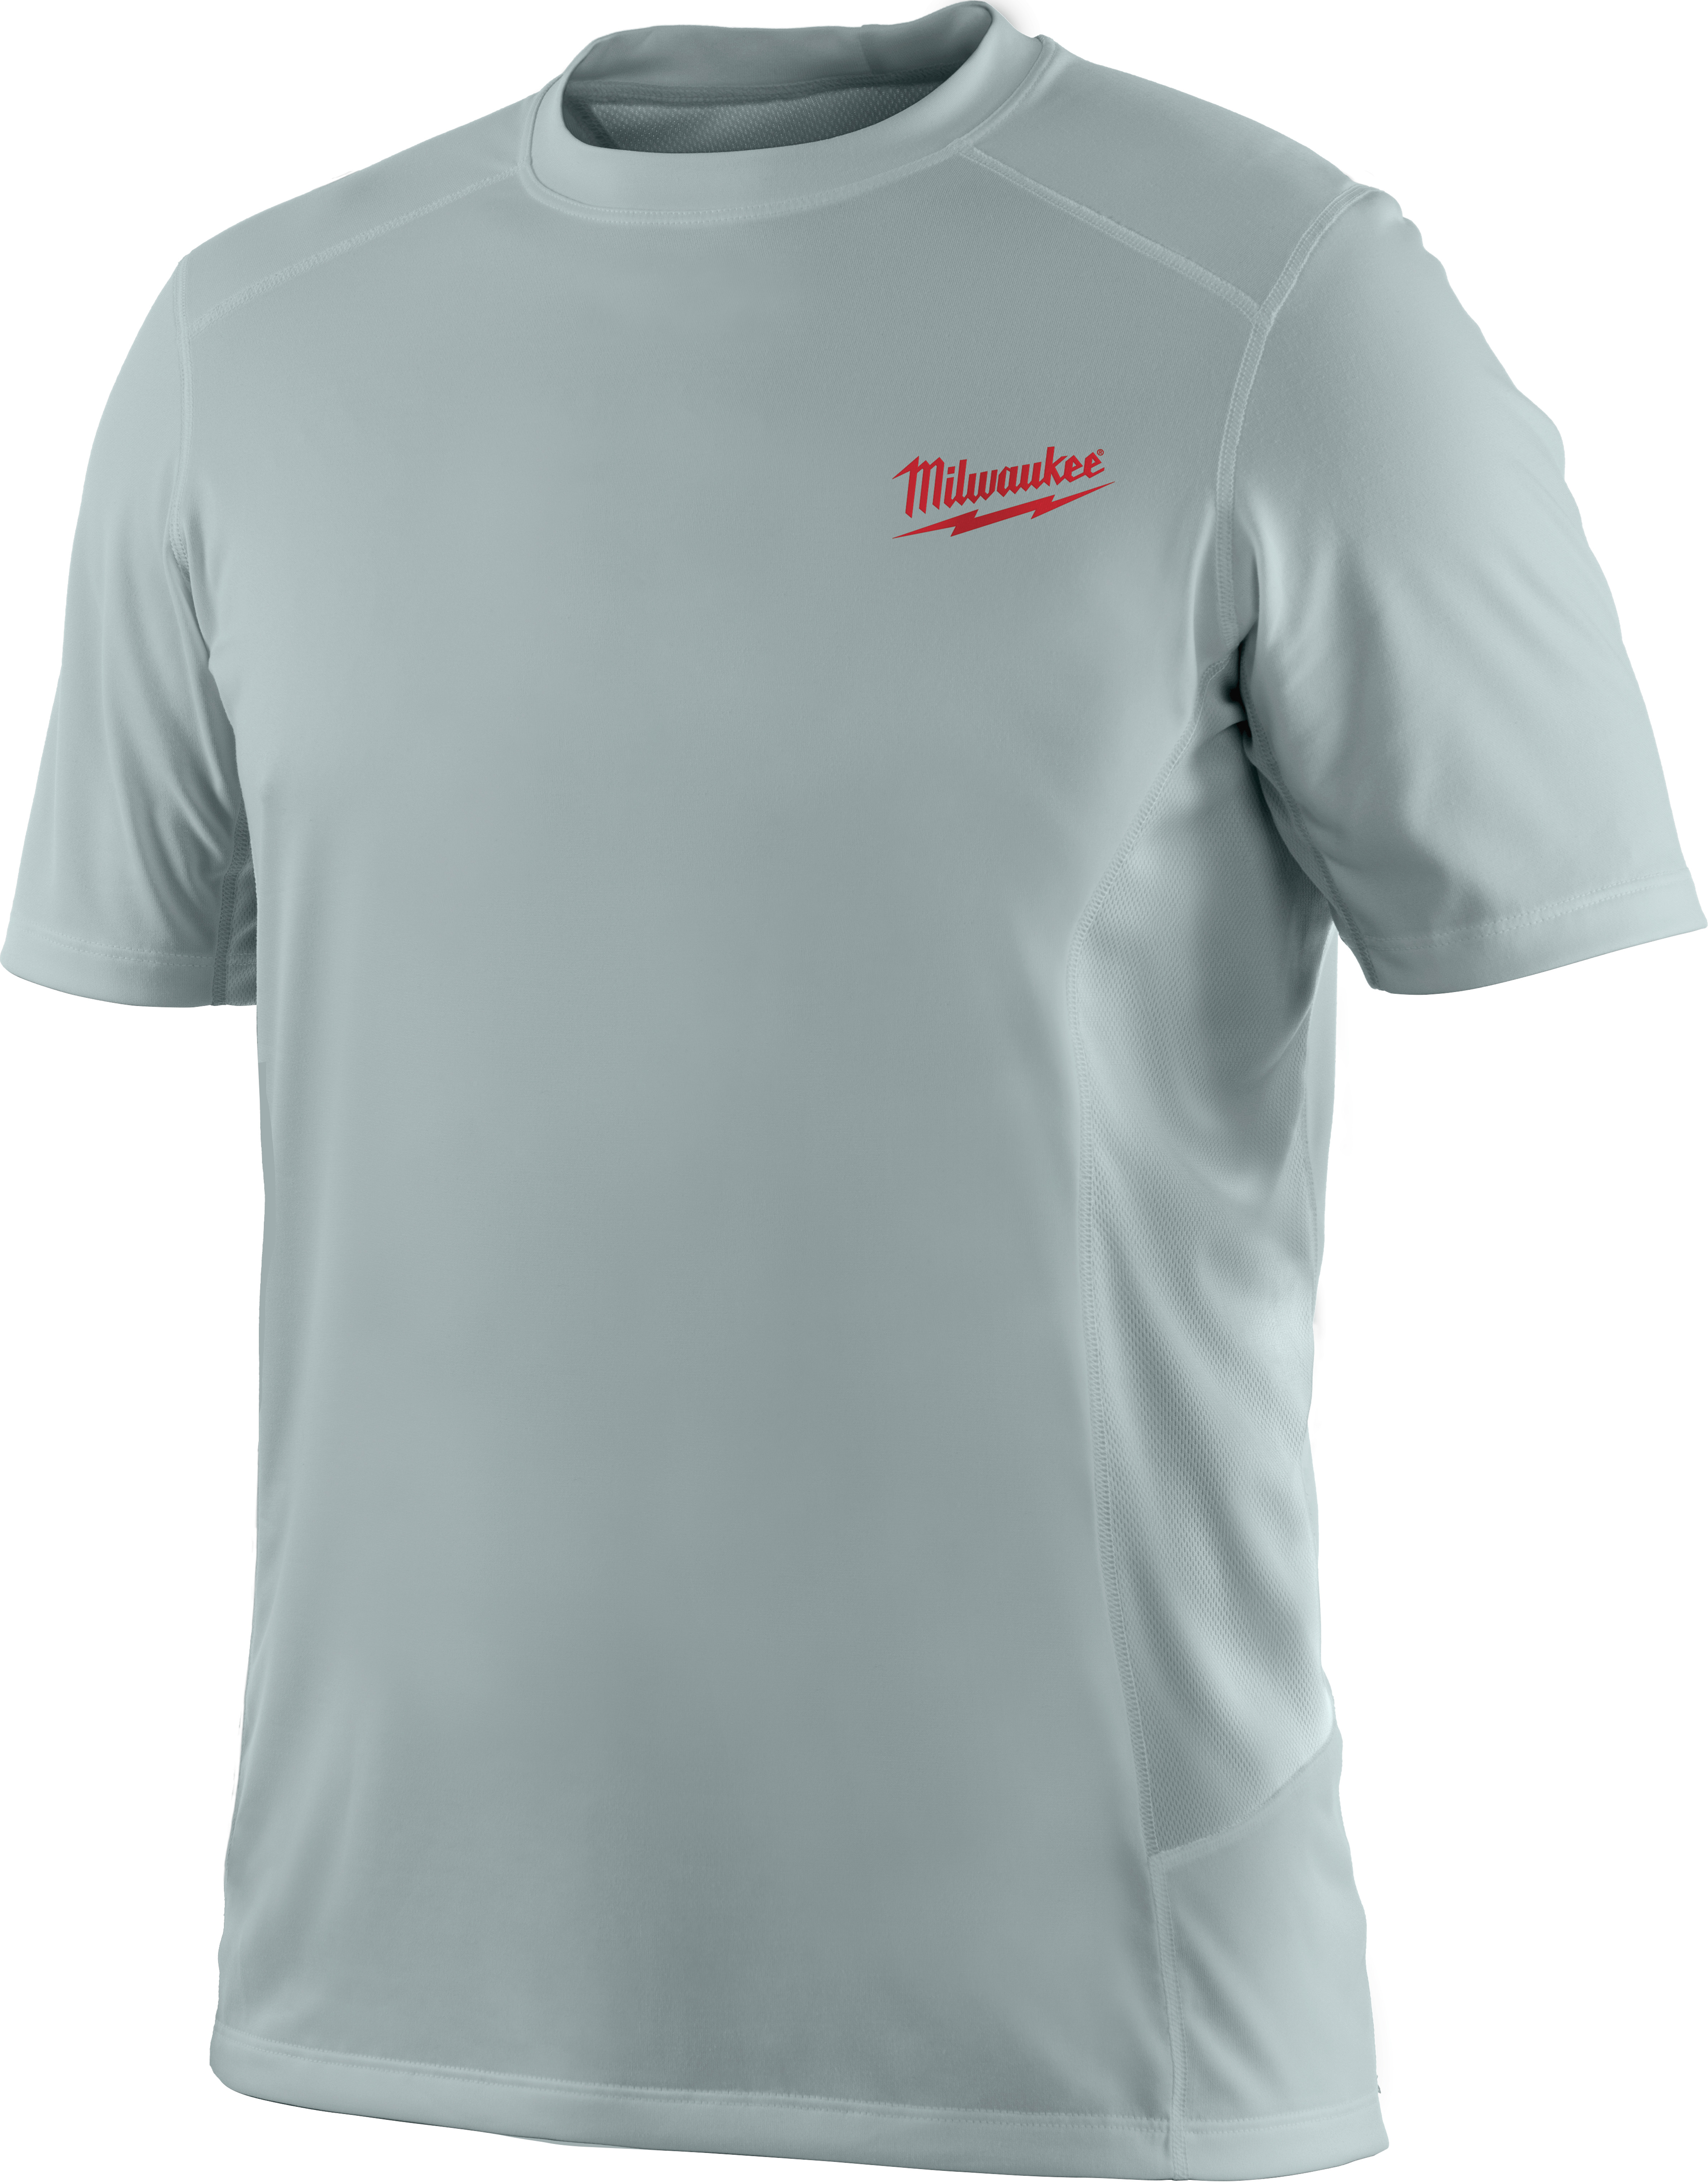 Milwaukee® WorkSkin™ Performance shirts are designed for tradesmen that need their next-to-skin layer to dry fast, keep them cool, and protect them from the sun in hot, summertime working conditions. Unlike cotton or standard wicking shirts, Milwaukee® WorkSkin™ performance shirts utilize patented hollowcore® fabrics to stay up to 30 percent cooler, wick moisture faster, and prevent uncomfortable saturation from sweat. The addition of fast wicking sweat zones underneath the arms and down the back help accelerate drying in high-sweat areas. Made with fabrics that resist pilling and snagging from repeated daily use, Milwaukee® WorkSkin™ performance shirts stay dry and stay cool to reduce fatigue from the hard work in the heat.  Features COOLCORE® performance fabrics use patented three-yarn construction to wick moisture away from the body and keep the garment up to 30 percent cooler when working in the heat. Fast wicking sweat zones extend down the back and under the arms to accelerate drying in high-sweat body areas. Chemical free moisture wicking allows shirt to dry faster, reduces saturation, and doesn’t wash out over time. UV protection helps block harmful rays from reaching the skin. Durable, pilling-resistant fabrics extend product life. Drop tail extended back provides extra coverage when working overhead. Seamless shoulders reduce discomfort from straps and harnesses 15691